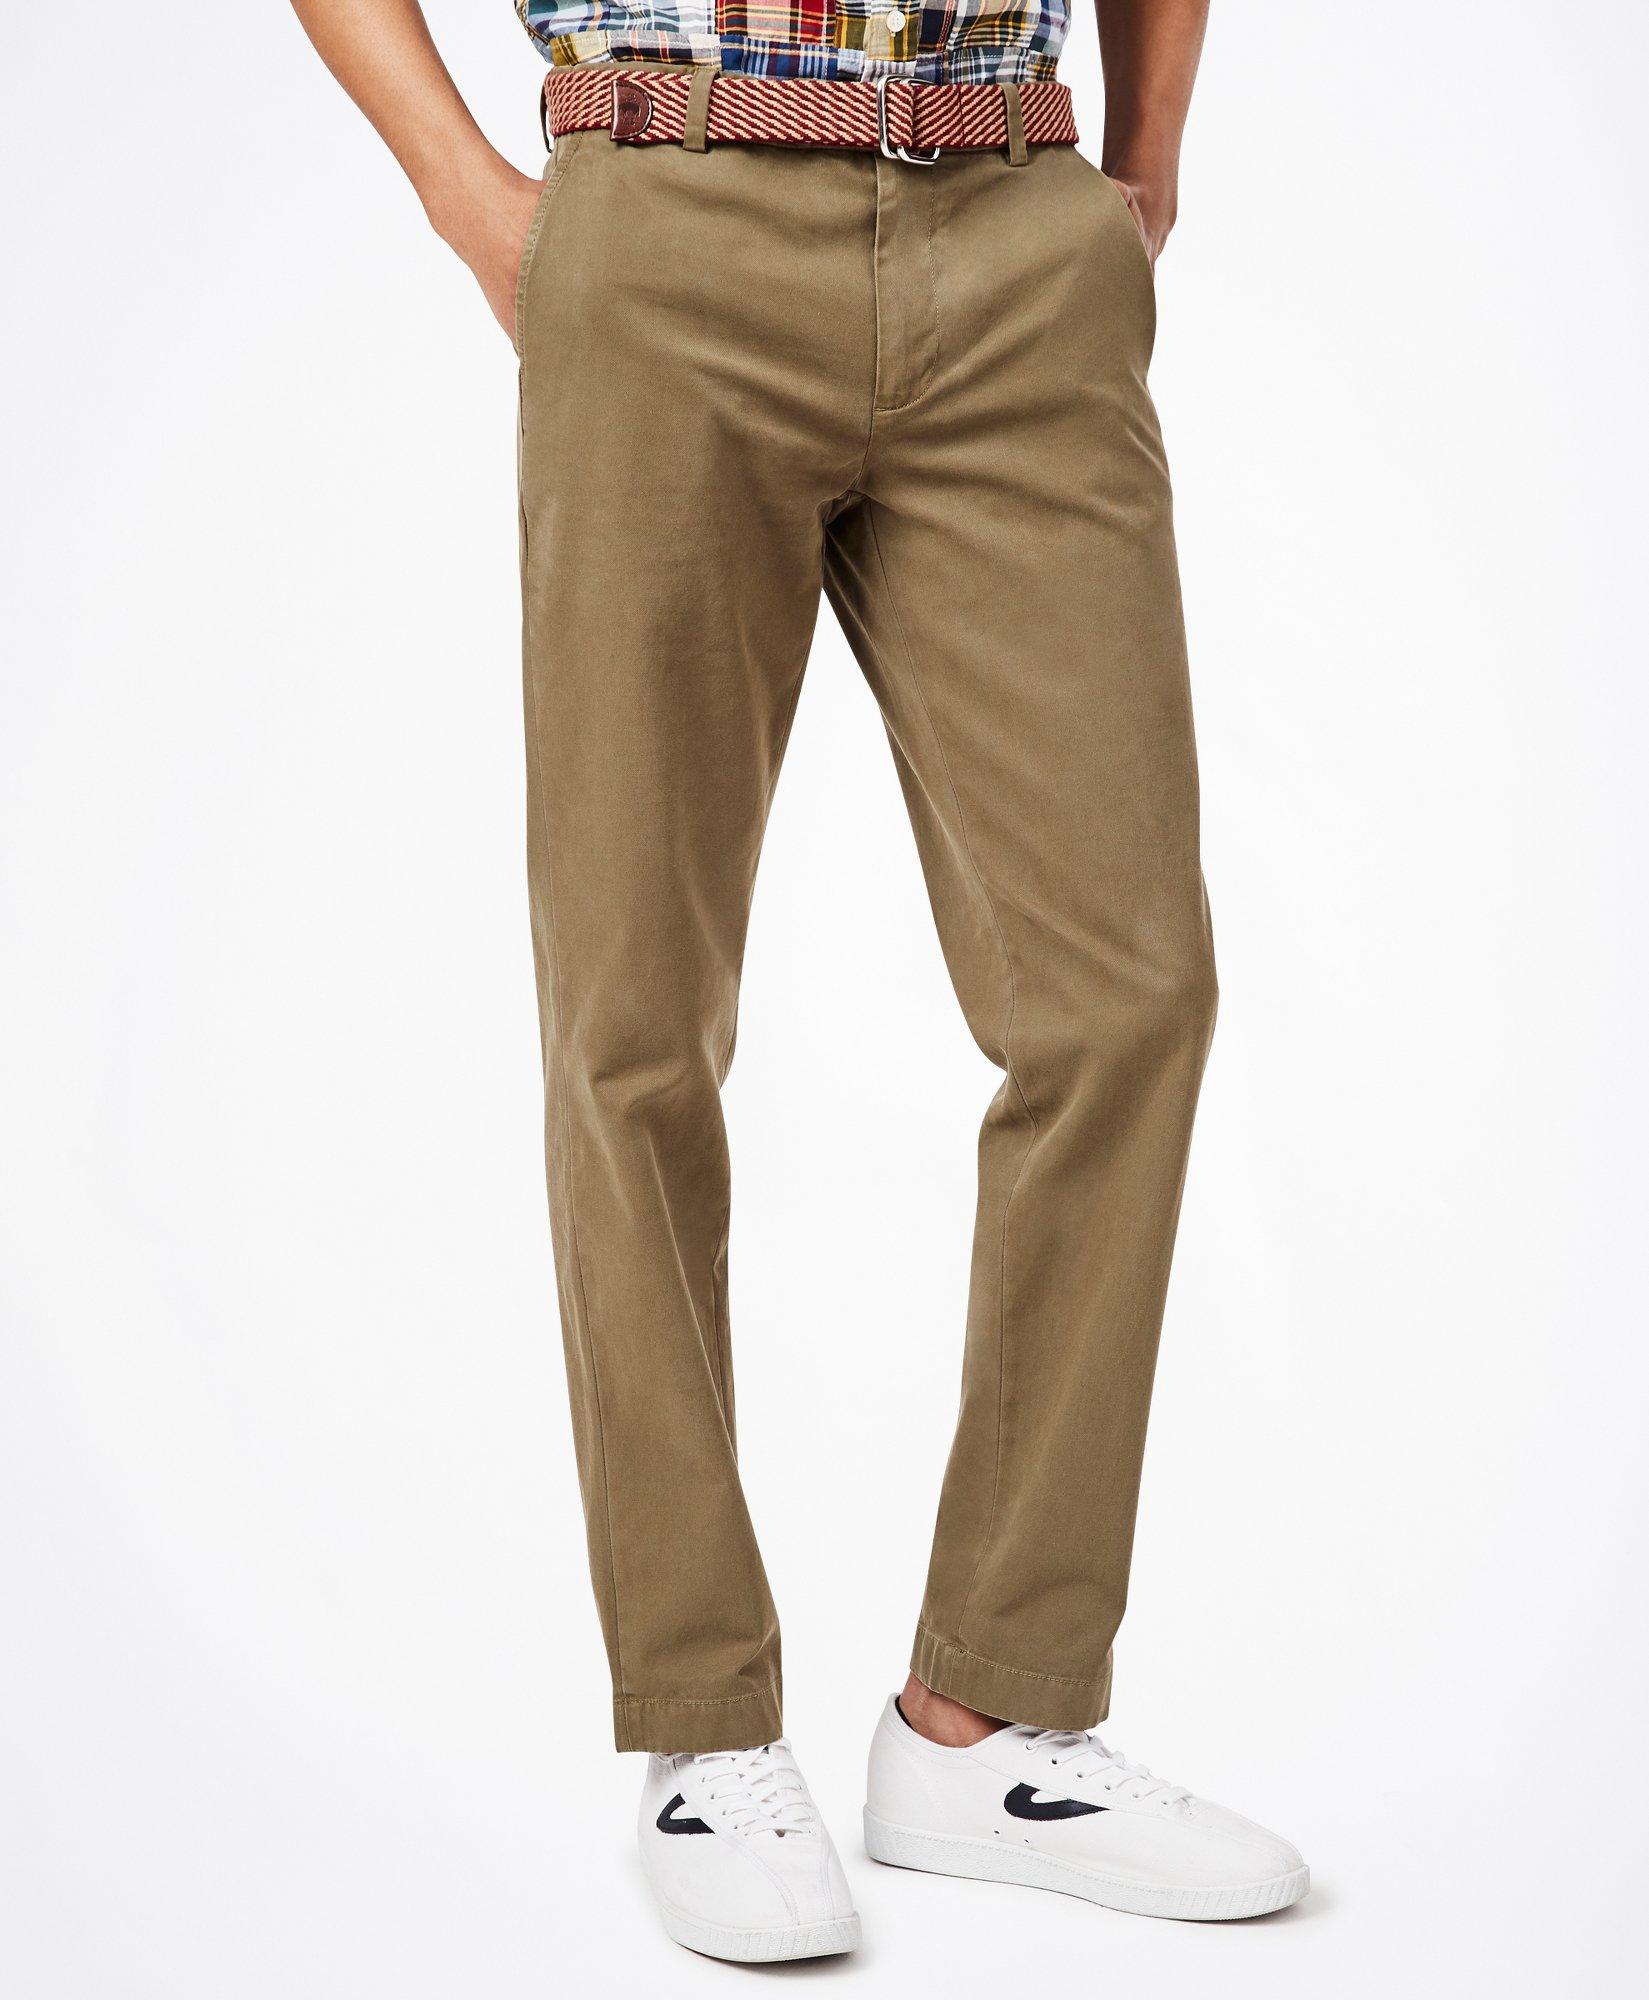 Milano Fit Garment-Dyed Stretch Chino Pants